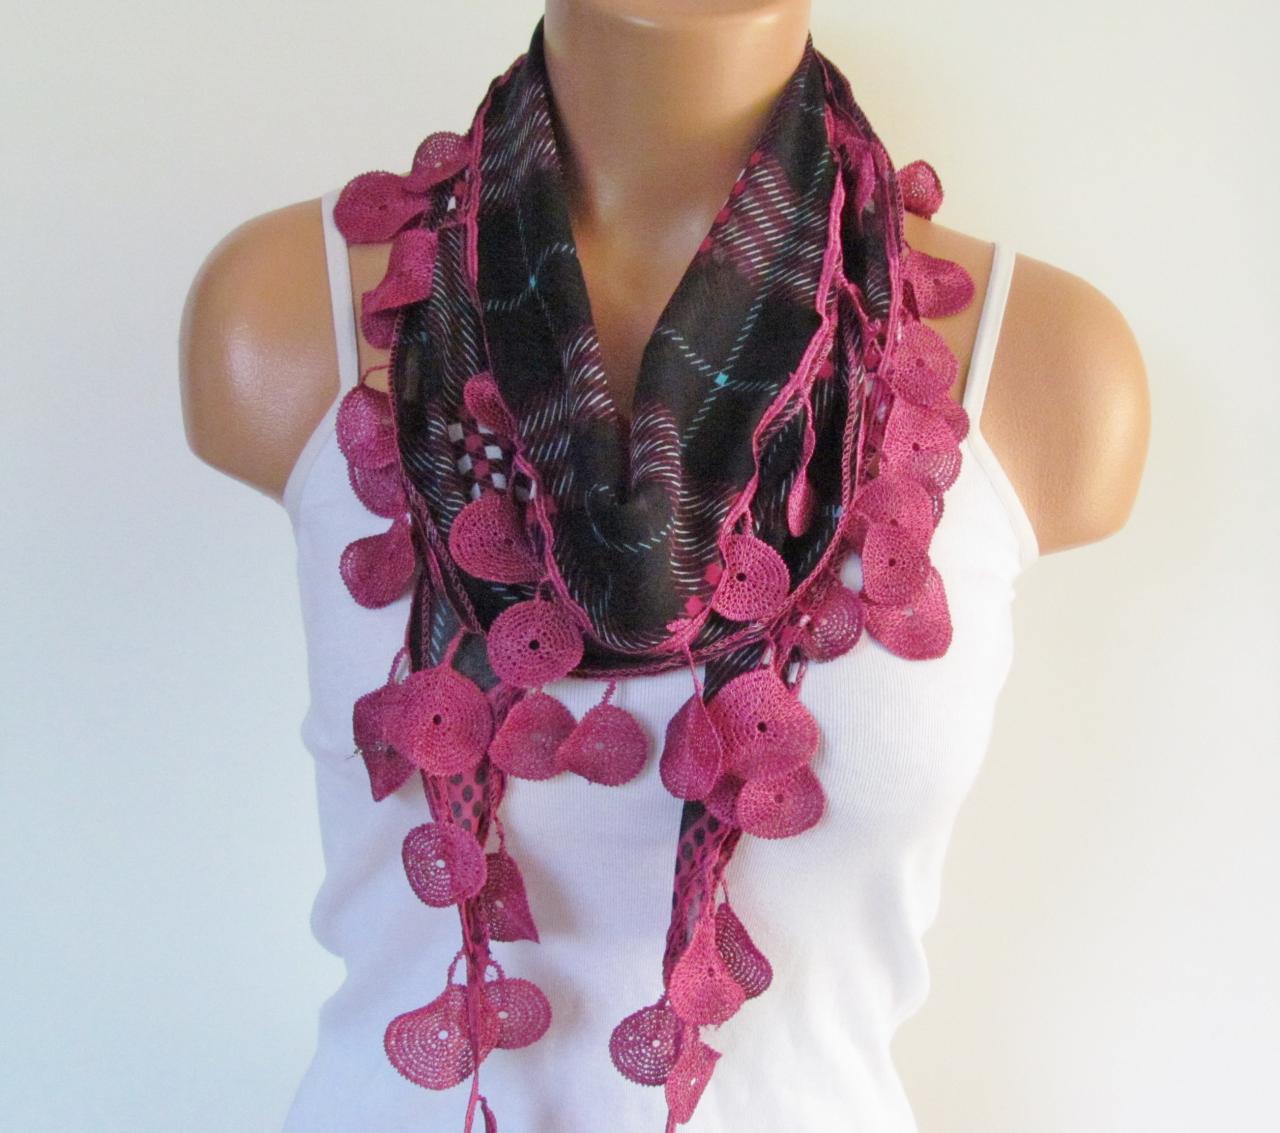 Plaid Long Scarf With Fringe-New Season Scarf-Headband-Necklace- Infinity Scarf- Spring Accessory-New Season-Gift-Pink and BlackScarf